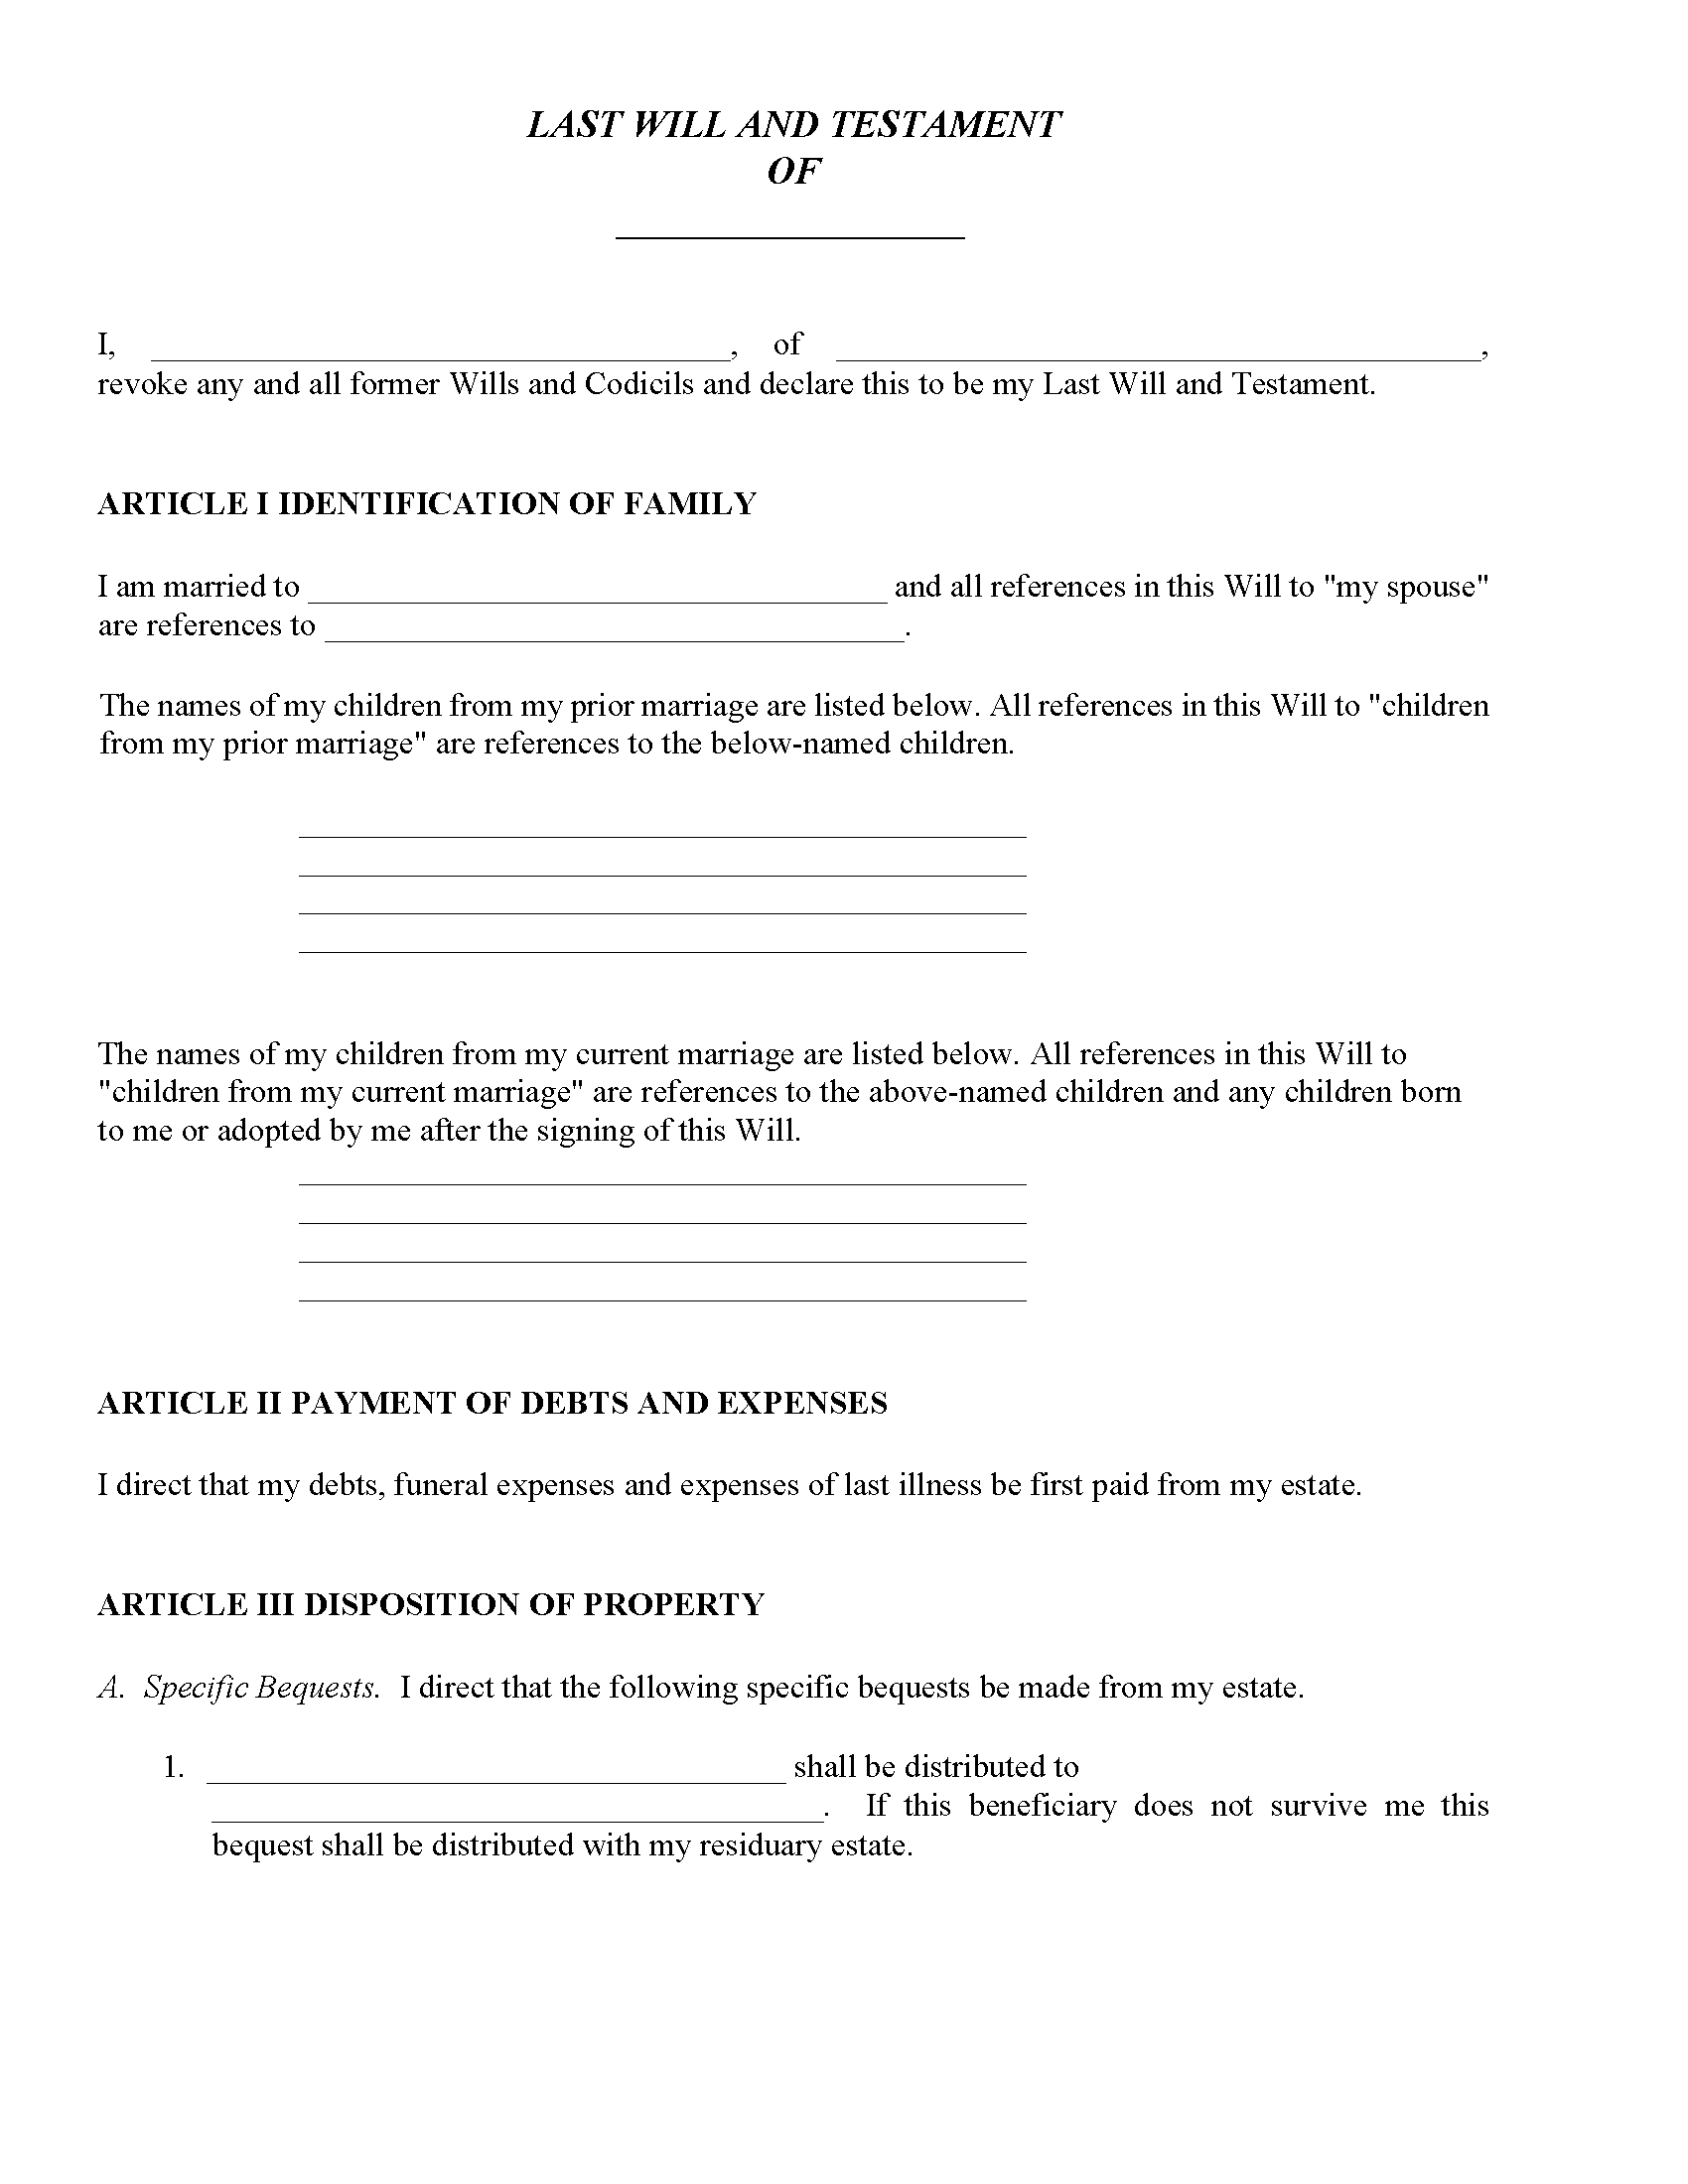 maryland-will-for-remarried-with-children-free-printable-legal-forms